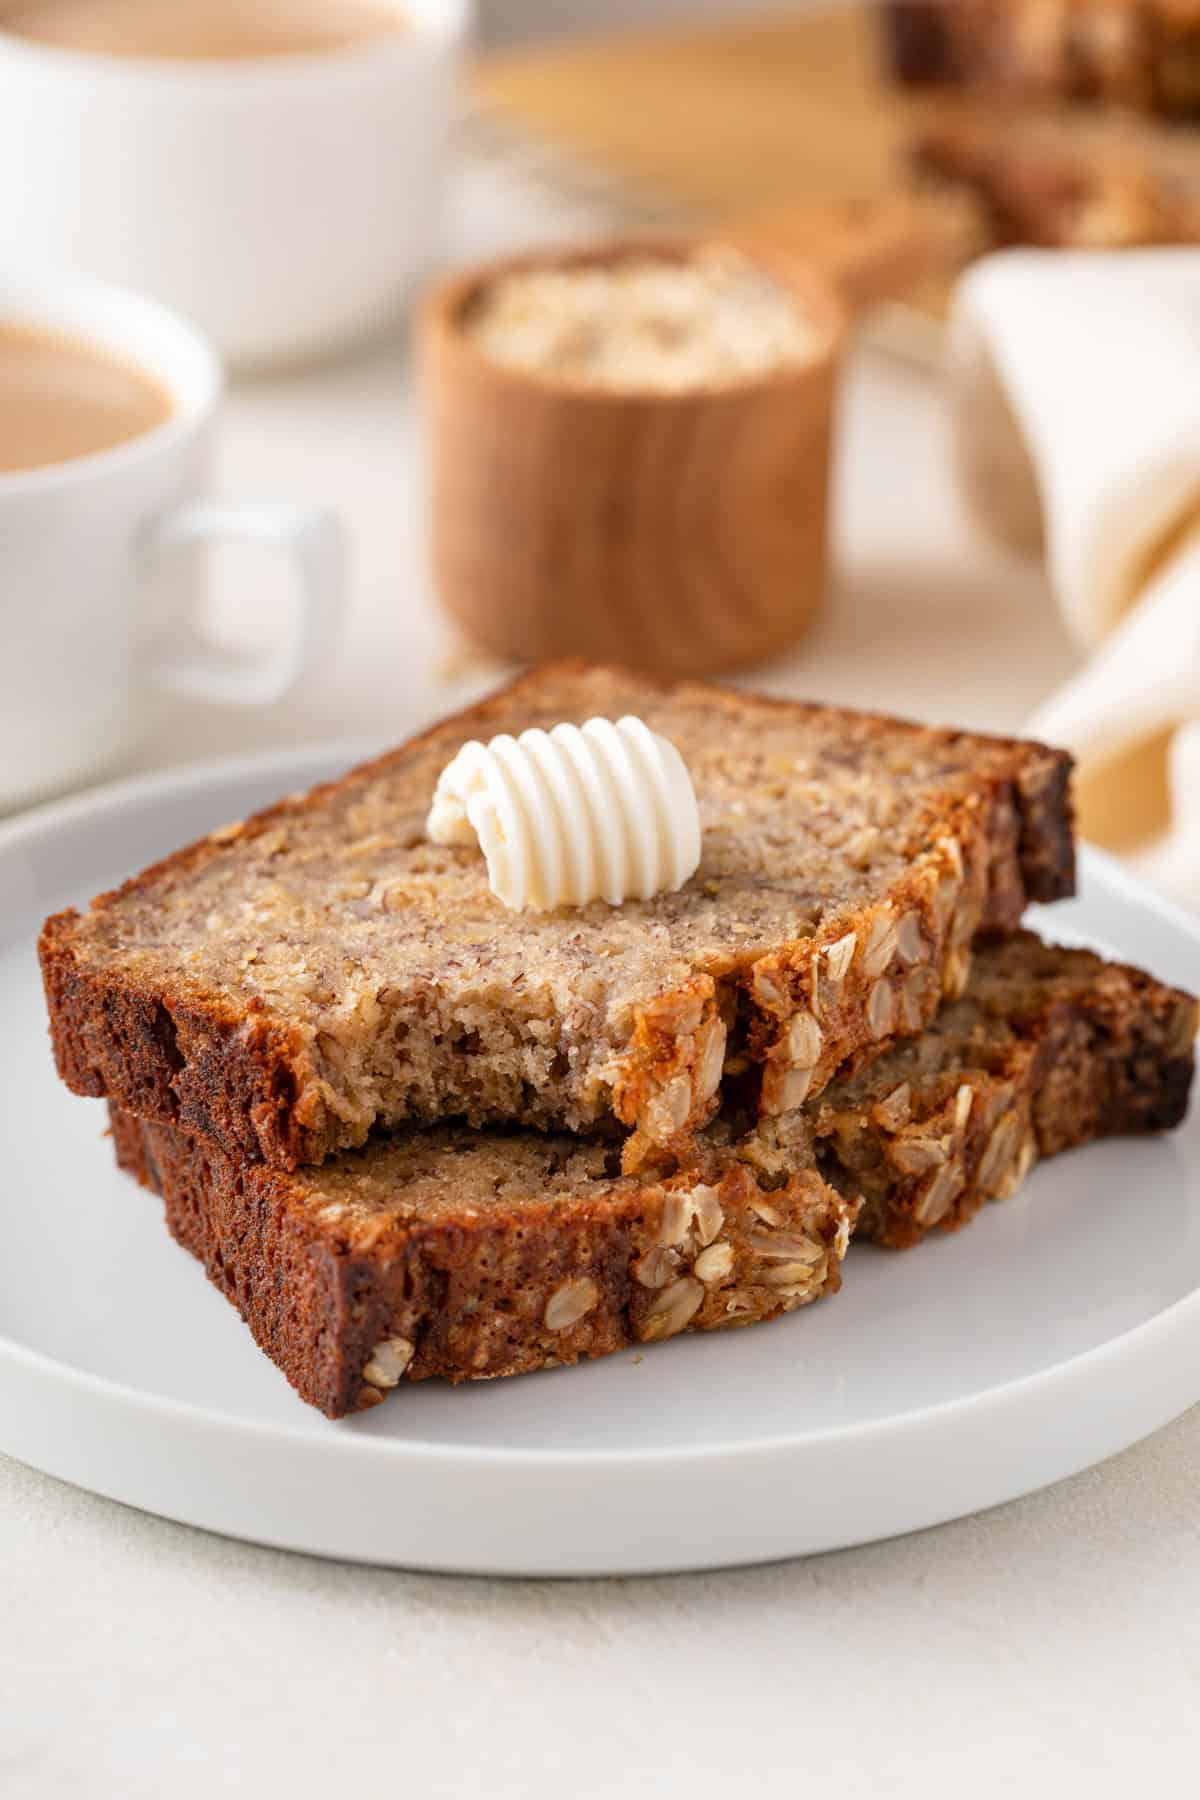 Two slices of oatmeal banana bread stacked on a plate, with a bite taken from the corner of the top piece.